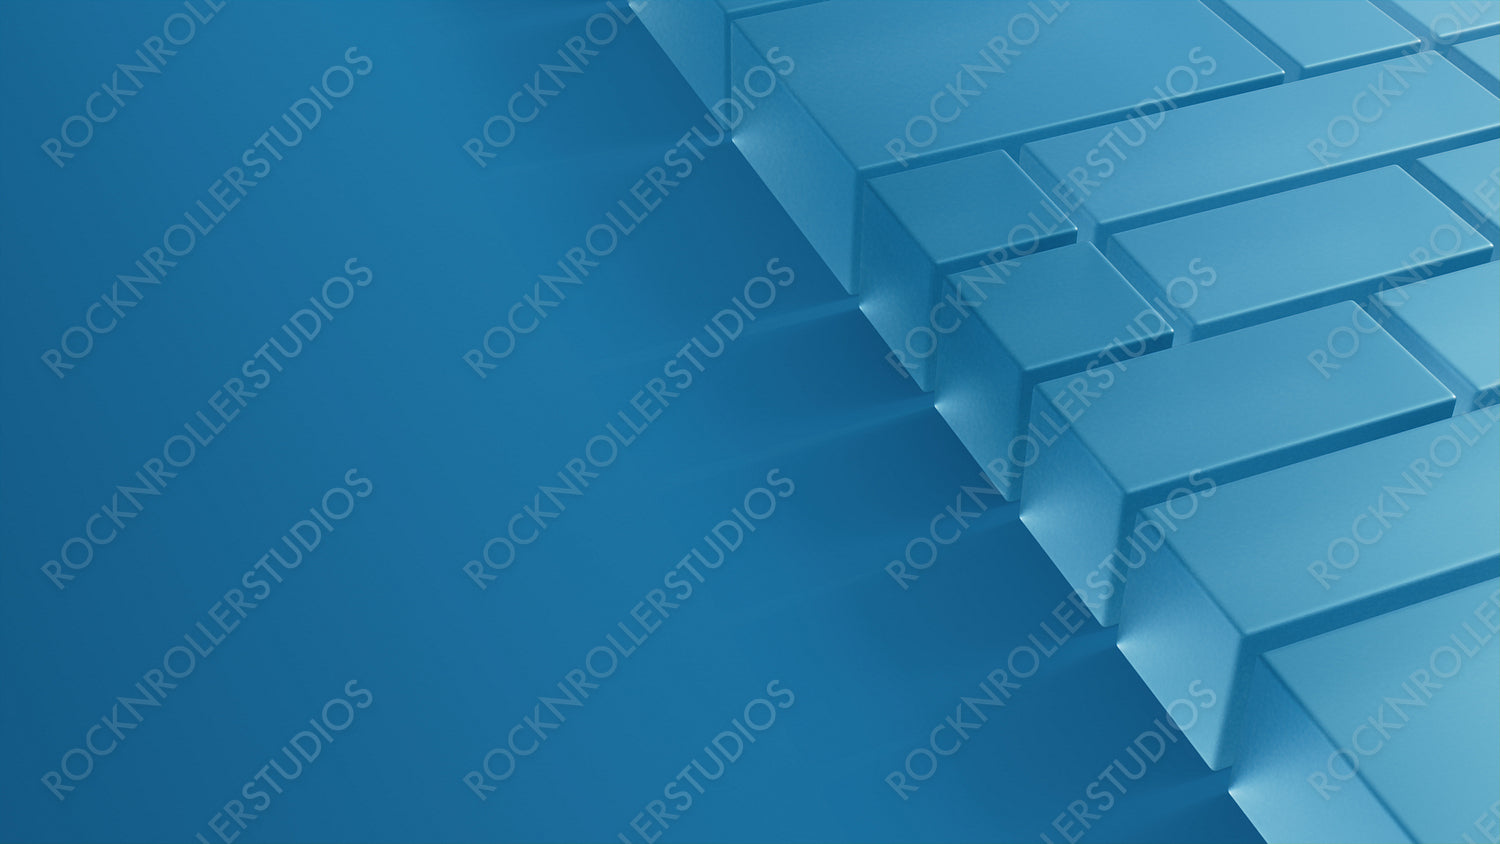 Acrylic Shapes on a Blue Surface. Futuristic Tech Concept with space for copy. 3D Render.